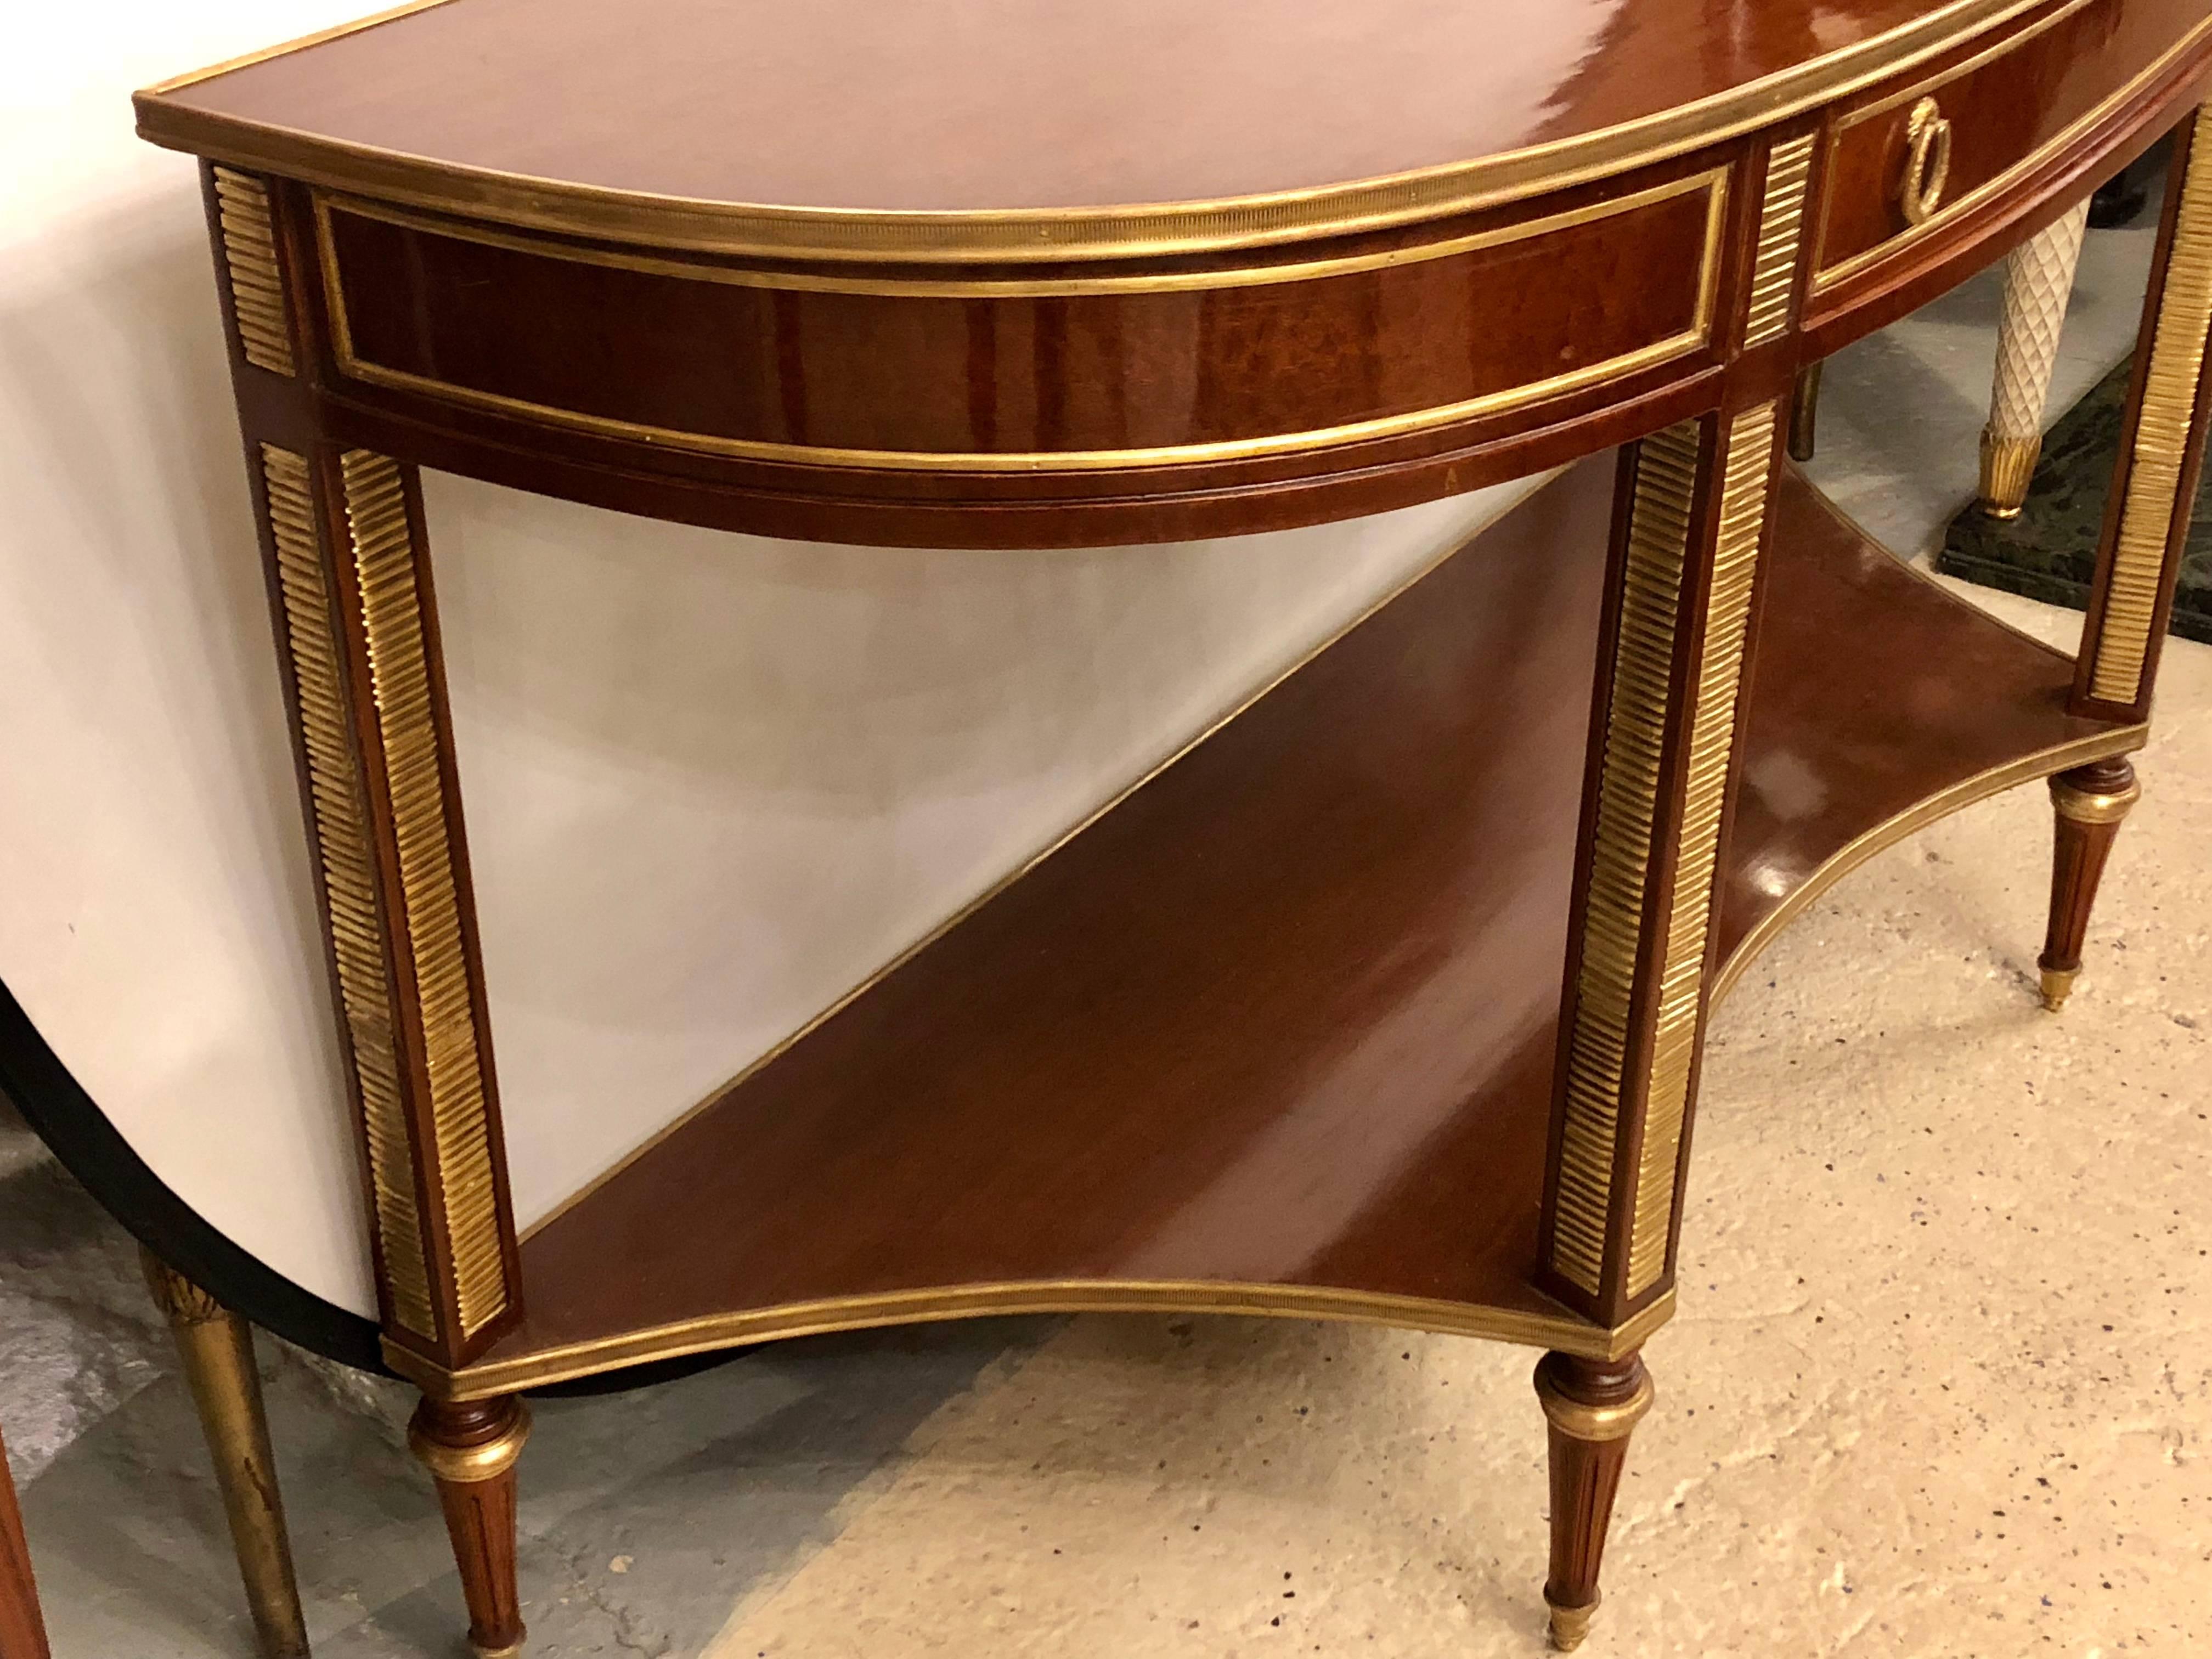 Pair of demilune mahogany bronze mounted Russian neoclassical consoles with inverted lower shelves. This fine custom quality Louis XVI pair of consoles sit on bronze mounted tapering legs leading to a inverted bronze framed shelf. The upper case has